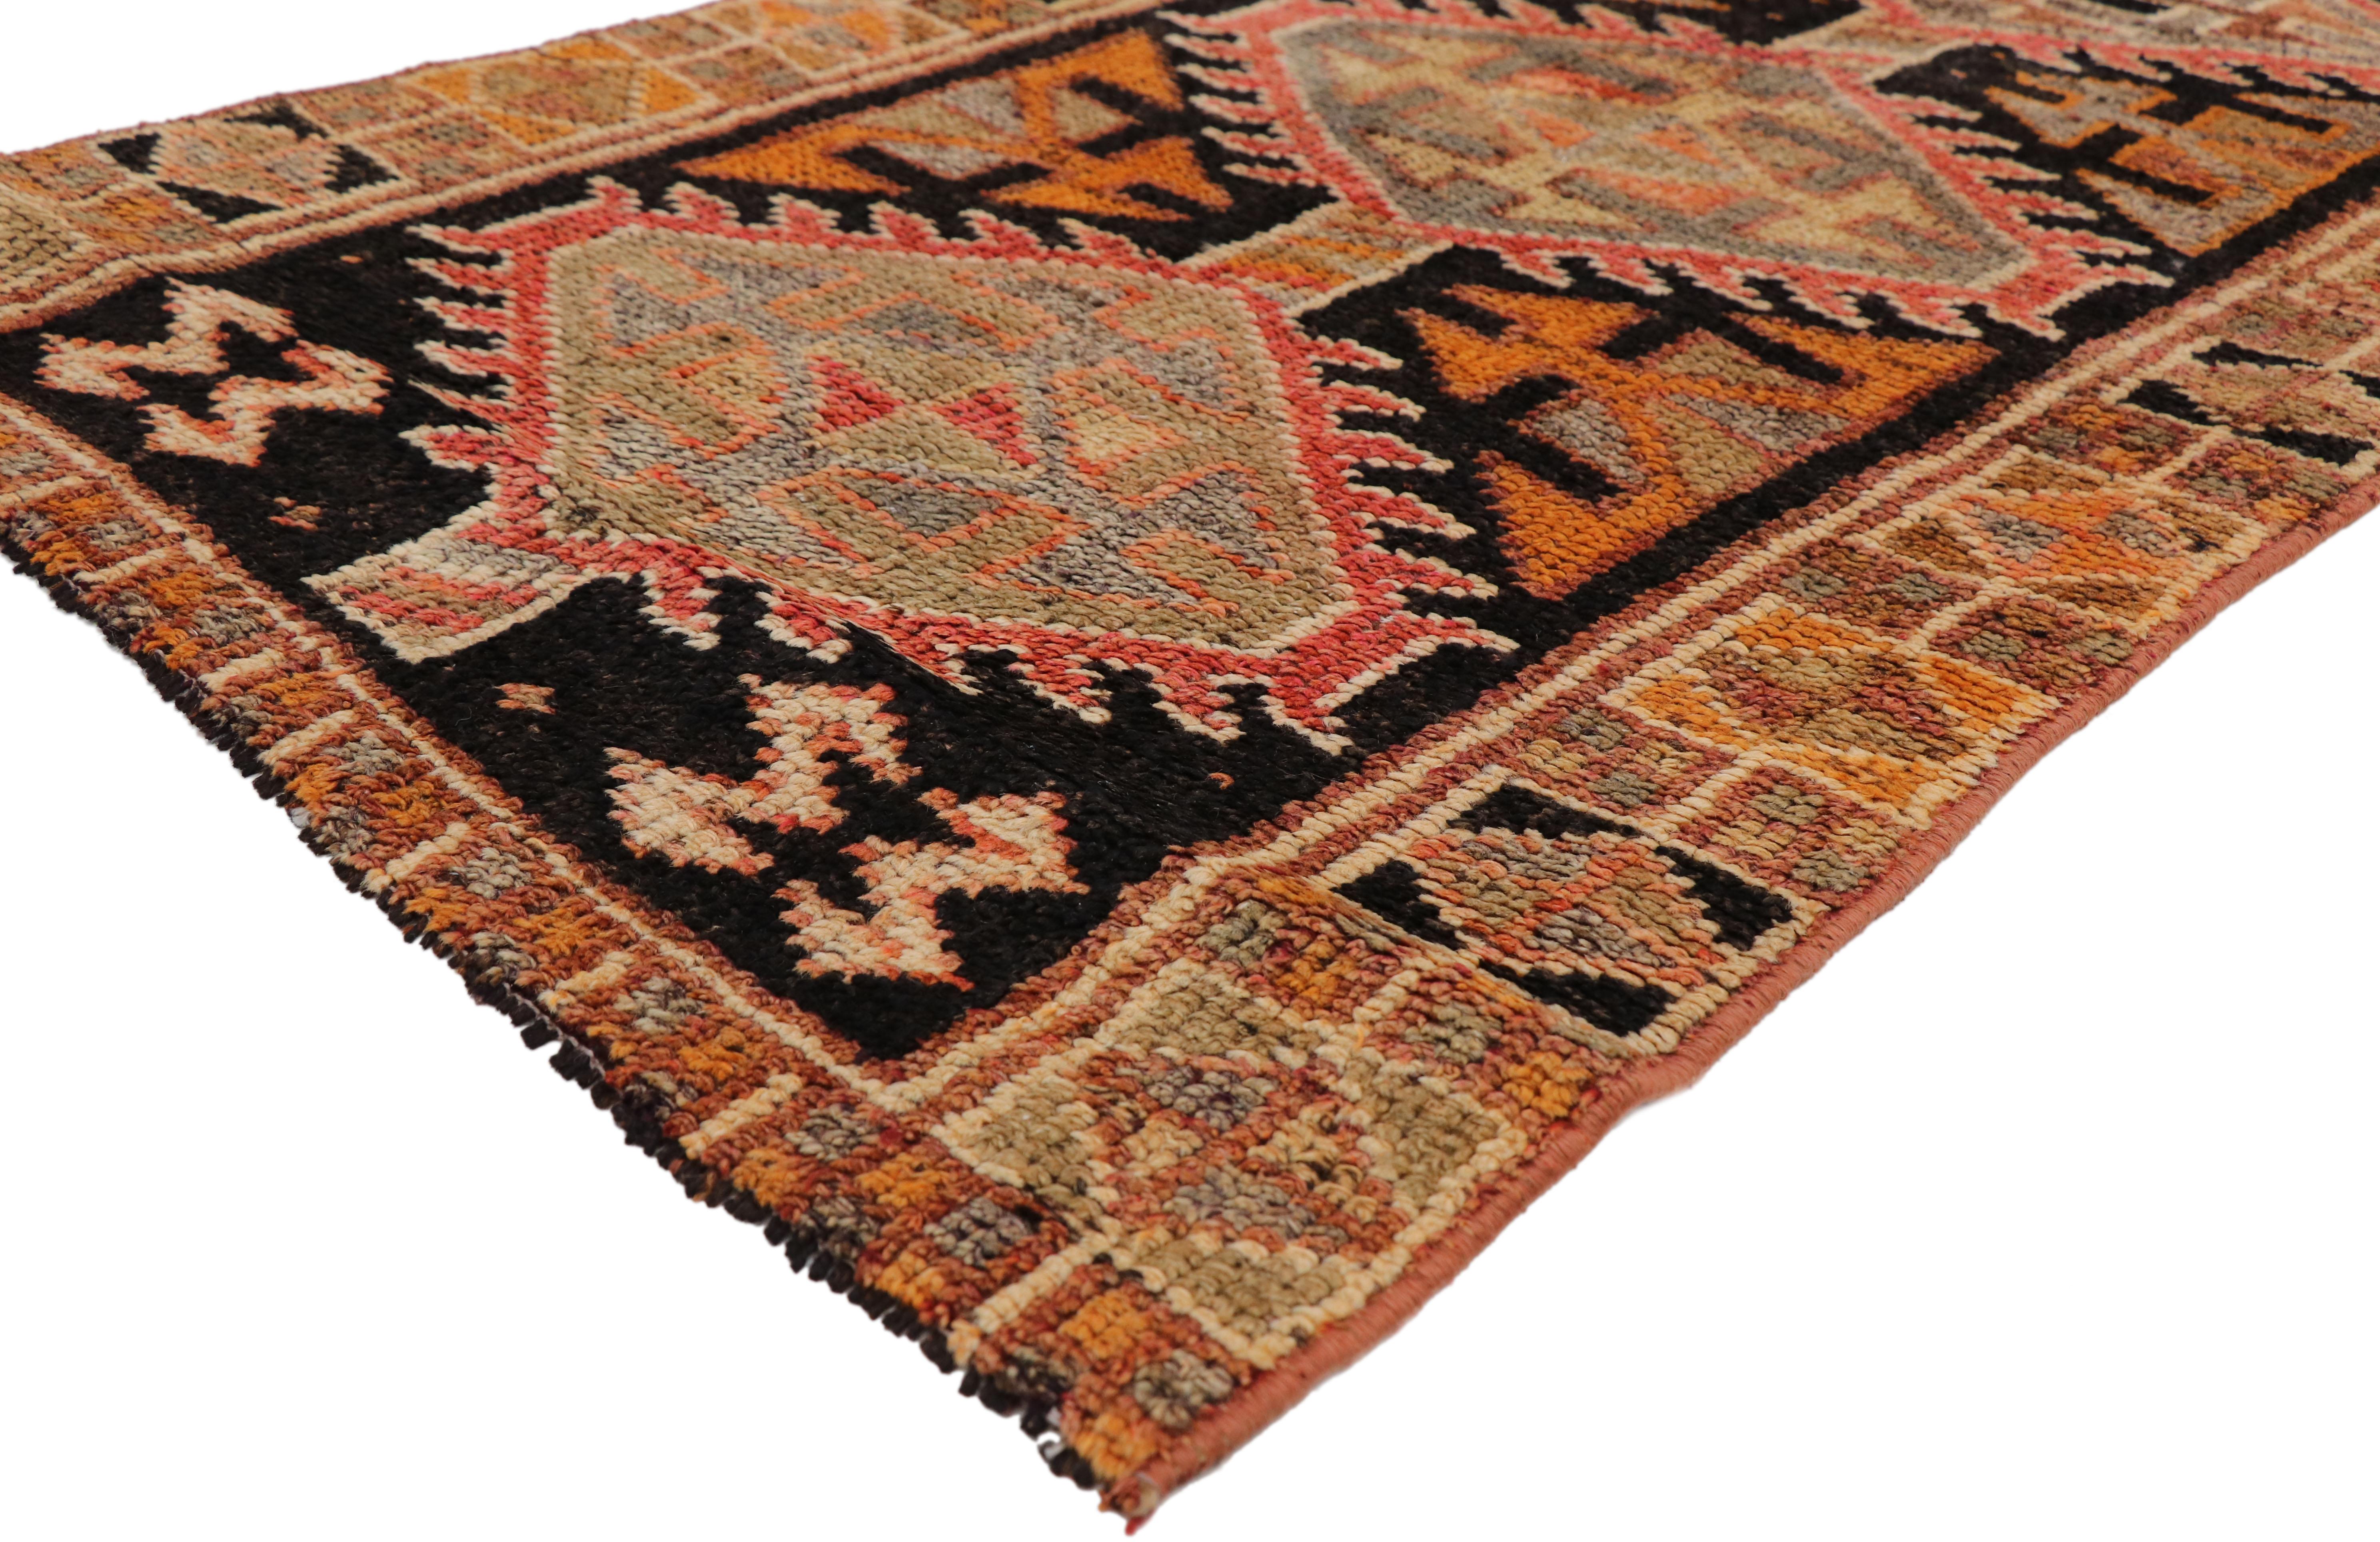 51717, vintage Turkish Oushak hallway runner with Rustic Arts & Crafts style. This hand knotted wool vintage Turkish Oushak runner features a series of hooked hexagonal pole medallions in alternating colors spread across an abrashed onyx field.